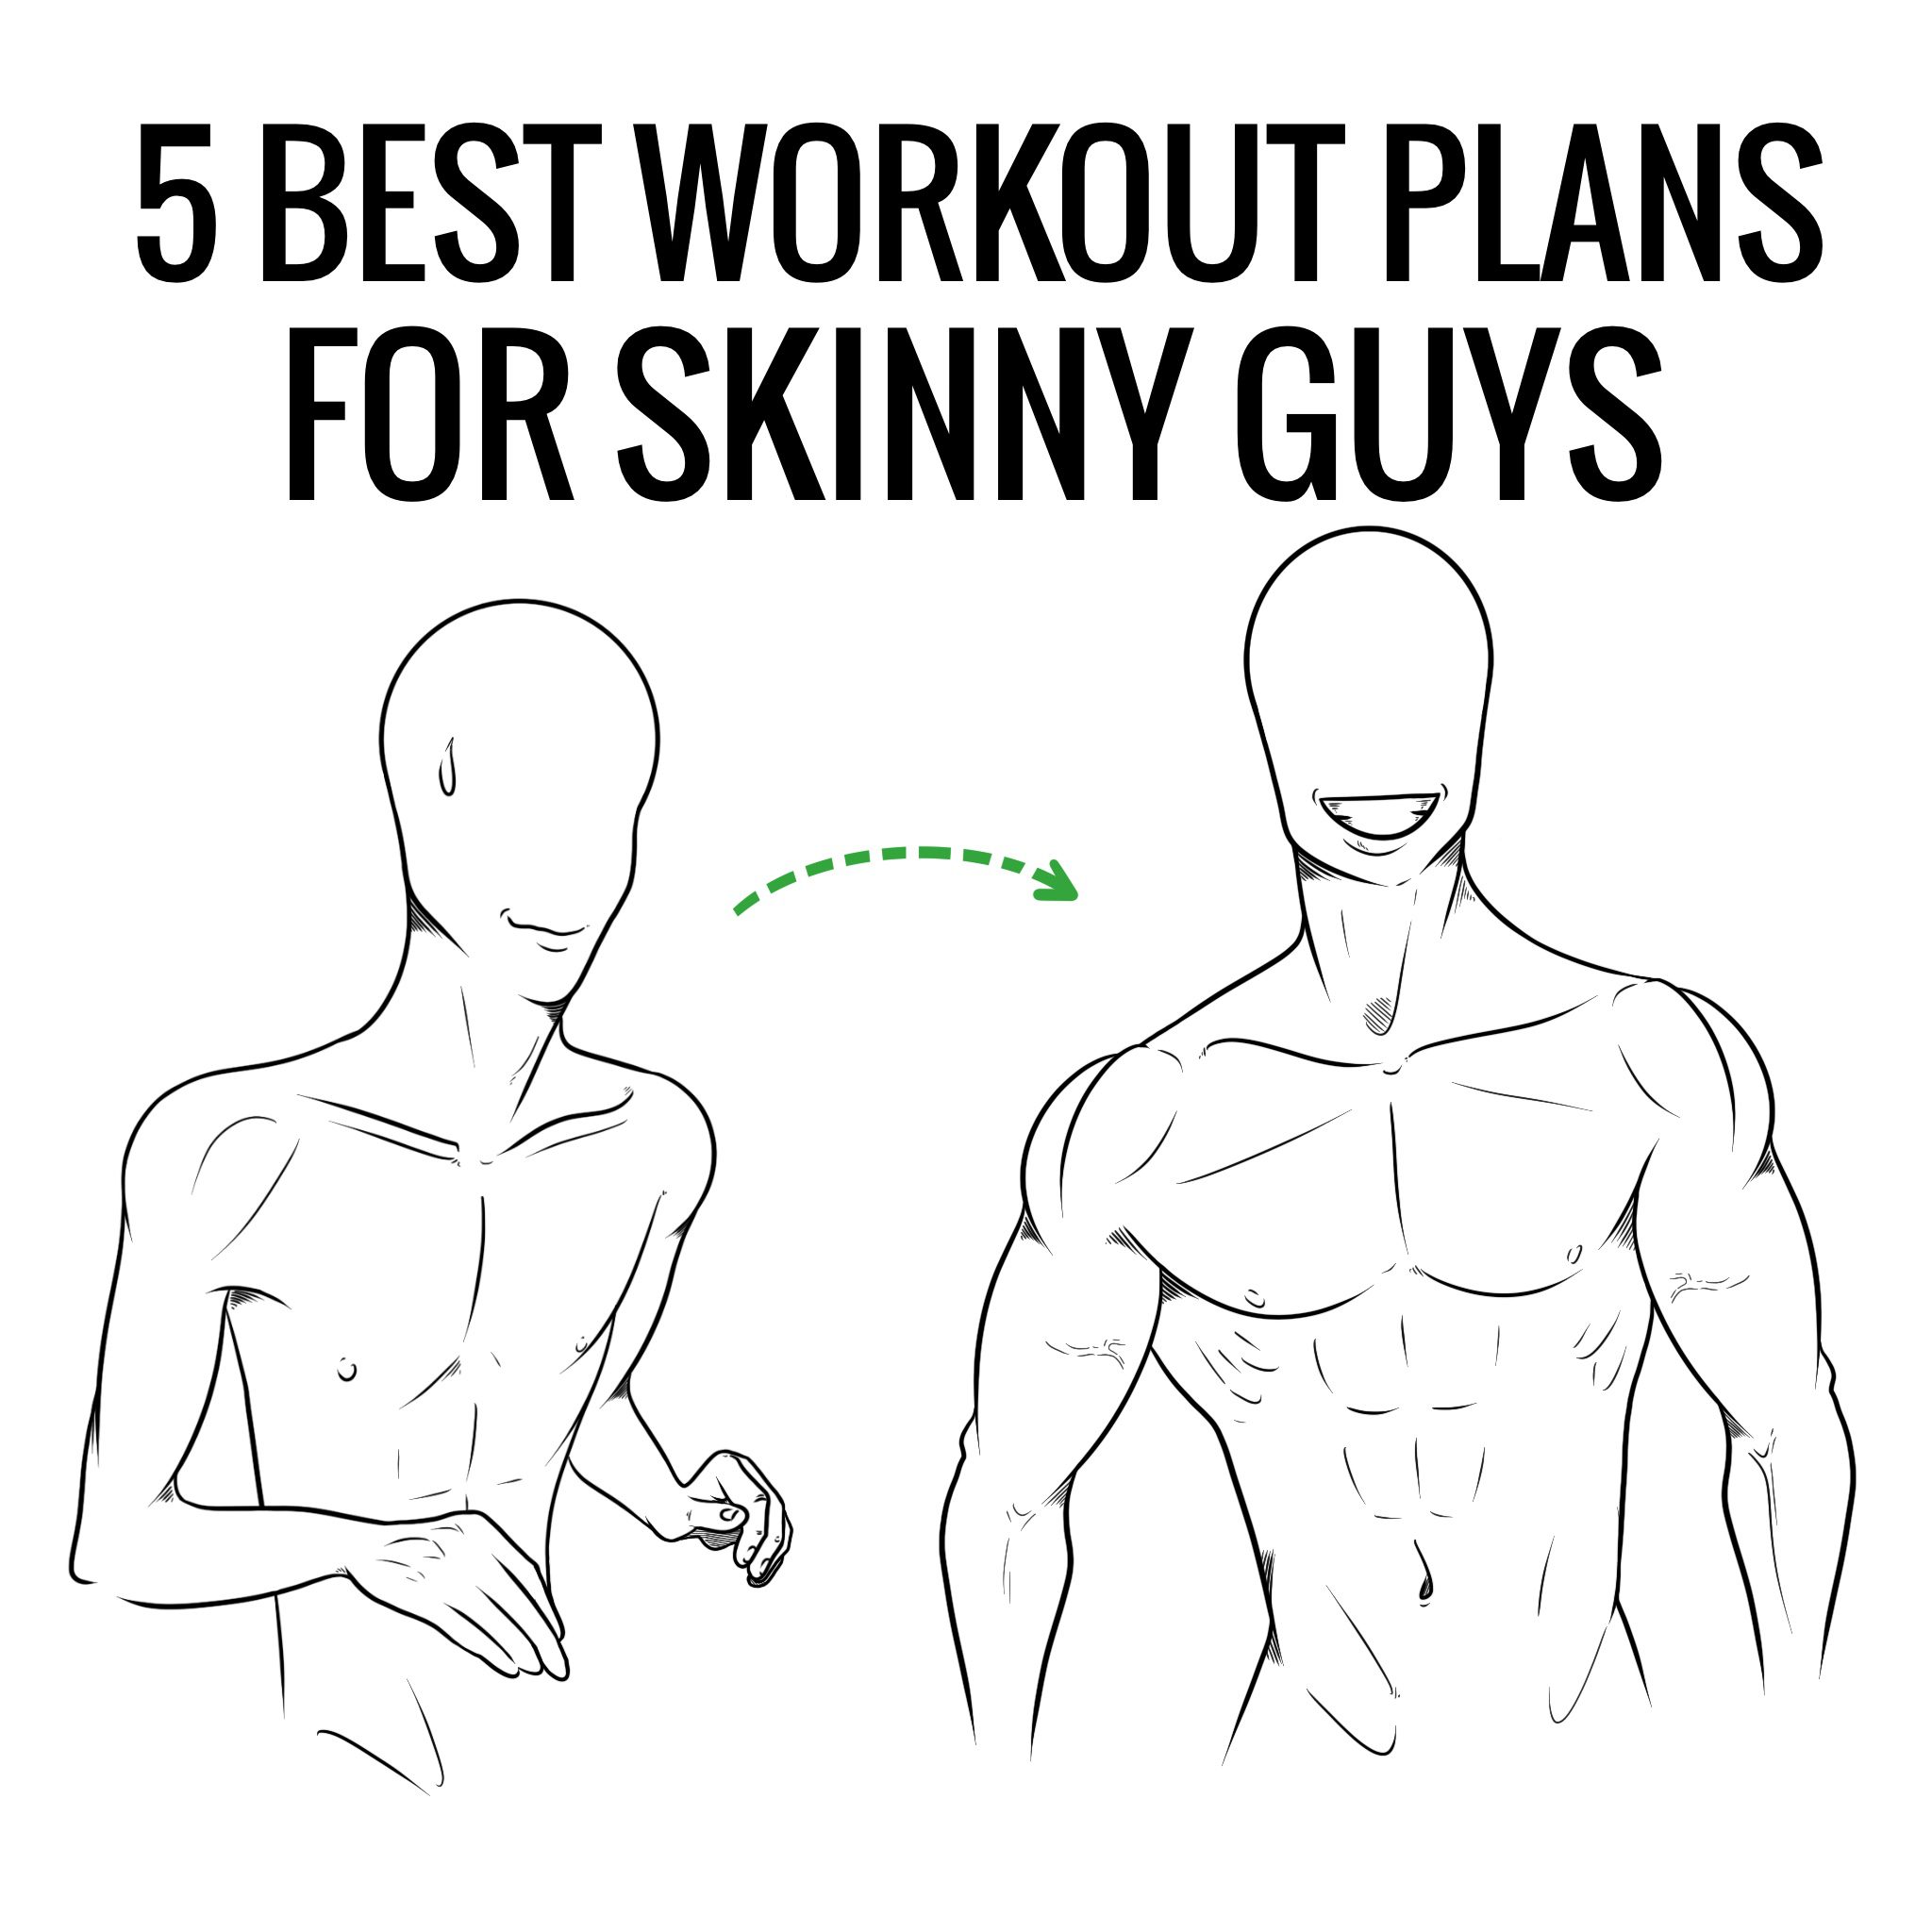 5 Best Workout Plans for Skinny Guys to Build Muscle Fast in 2021